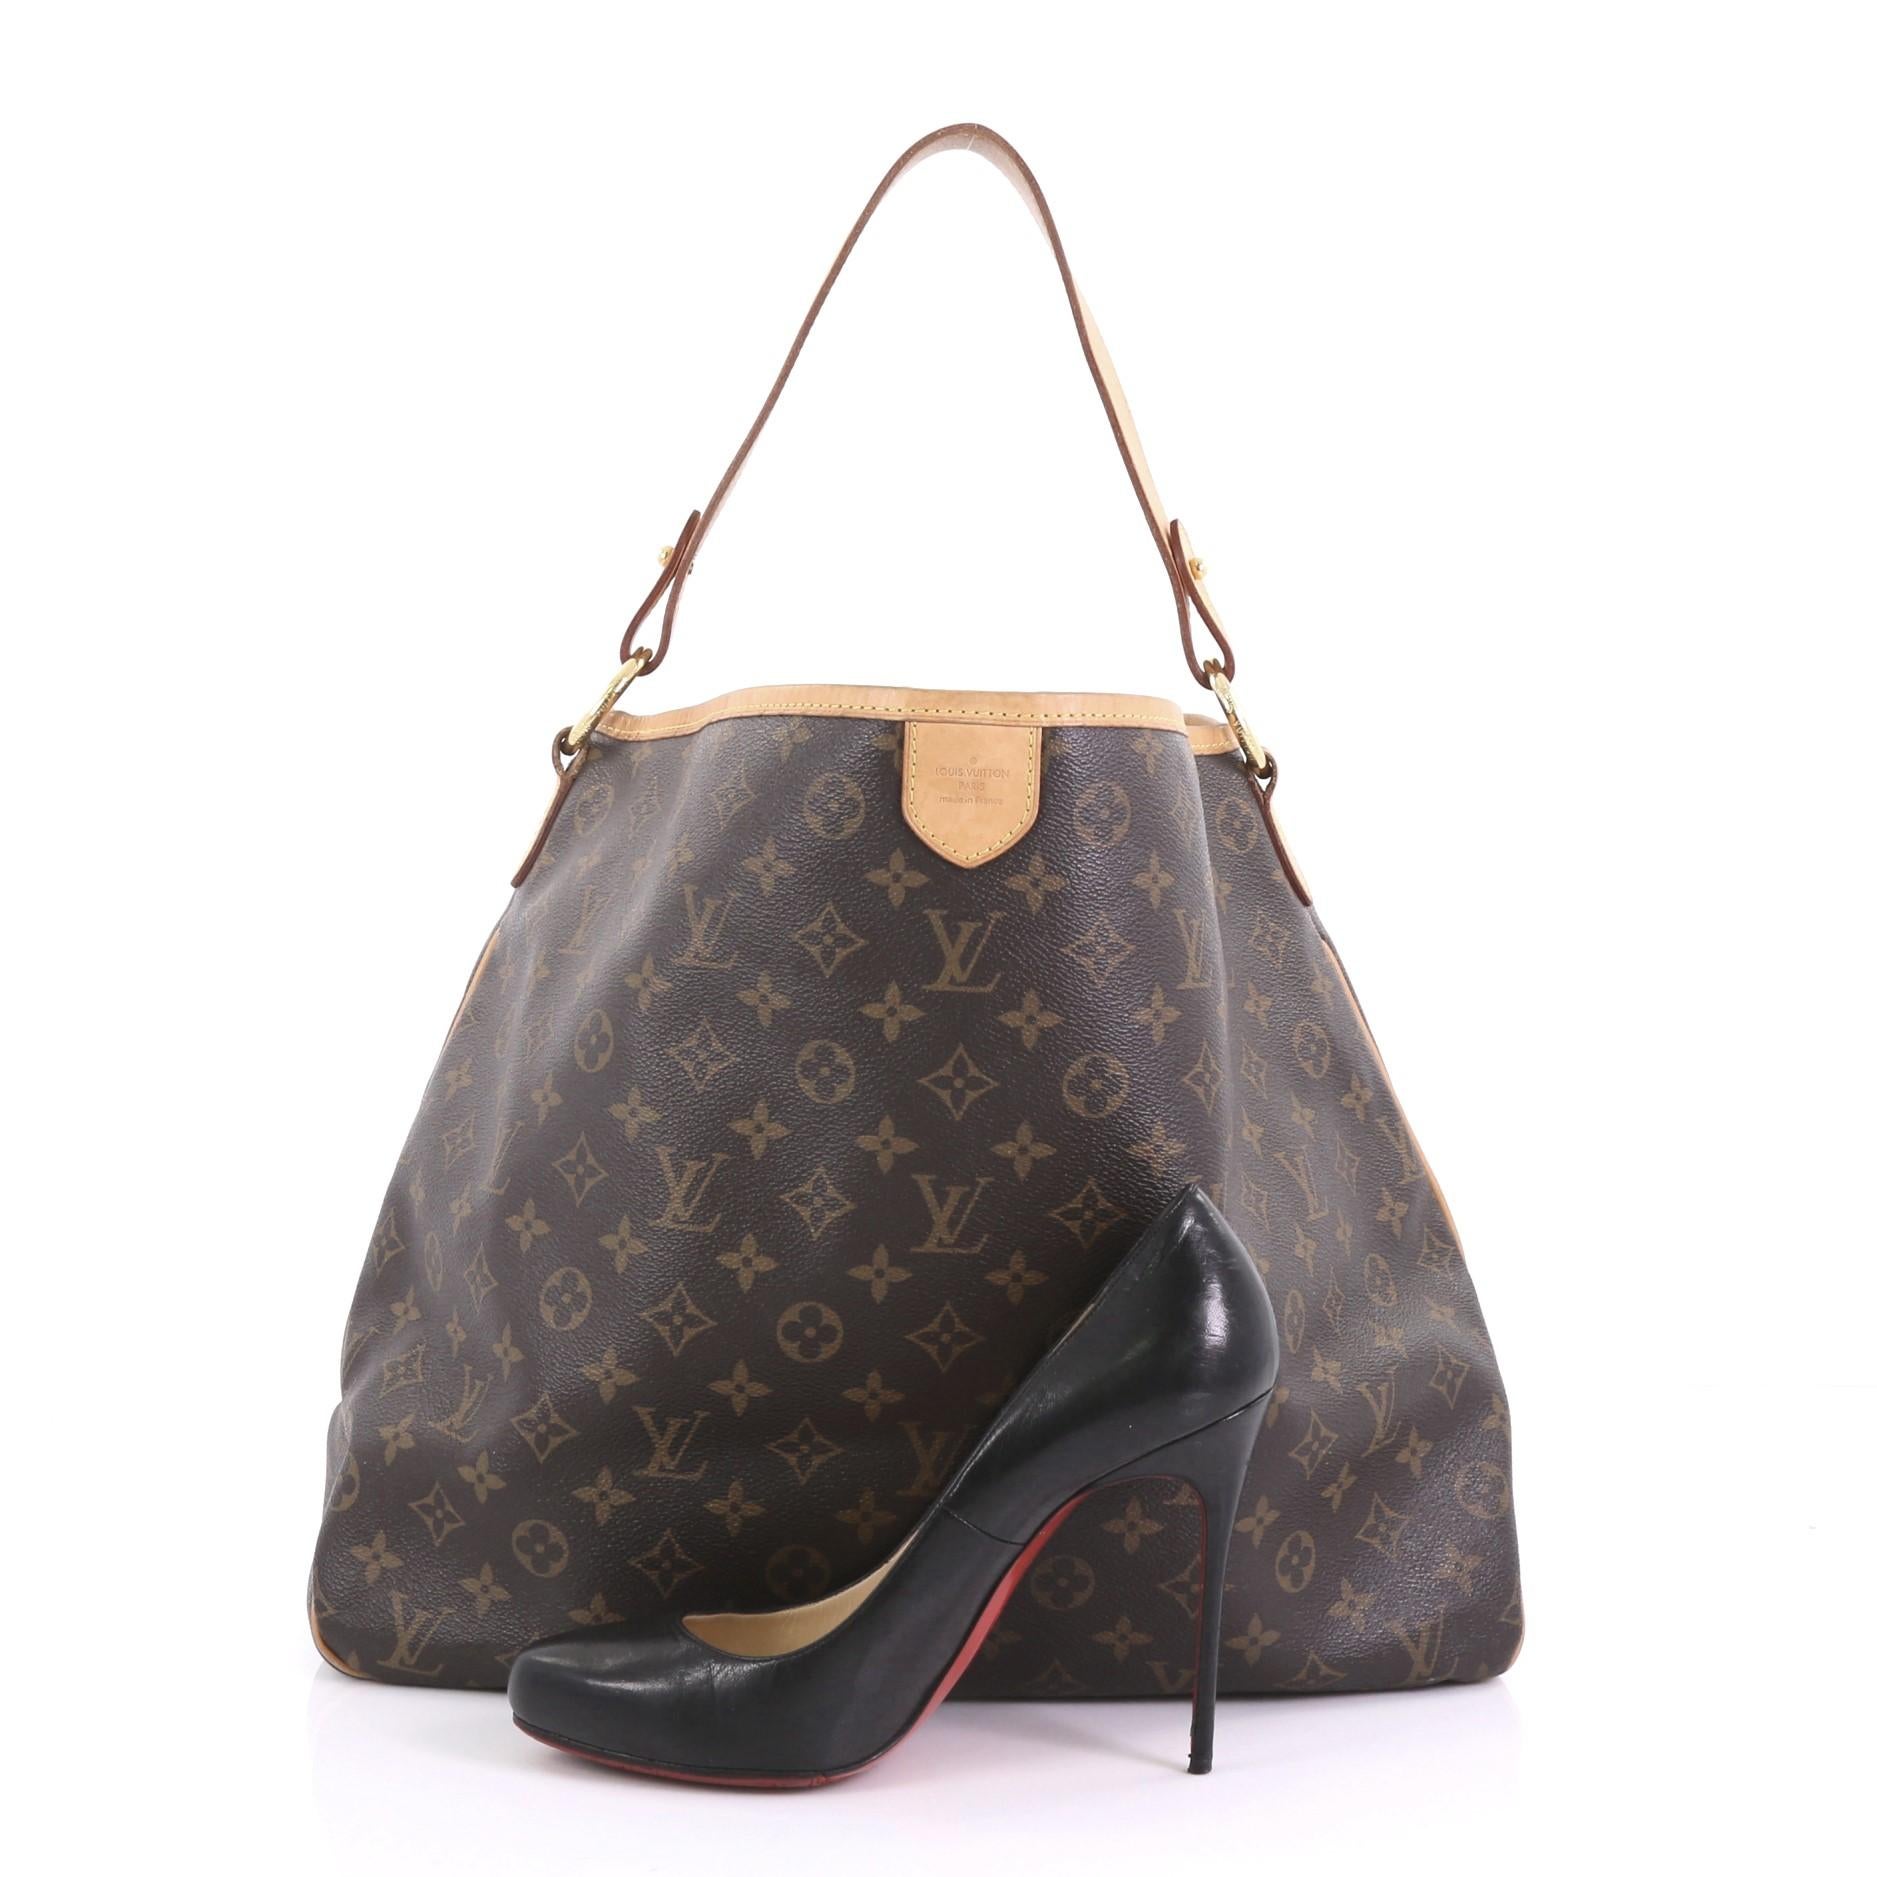 This Louis Vuitton Delightful Handbag Monogram Canvas MM, crafted in brown monogram coated canvas, features a flat leather loop handle, cowhide leather trims, and gold-tone hardware. Its snap hook closure opens to a light brown fabric interior with